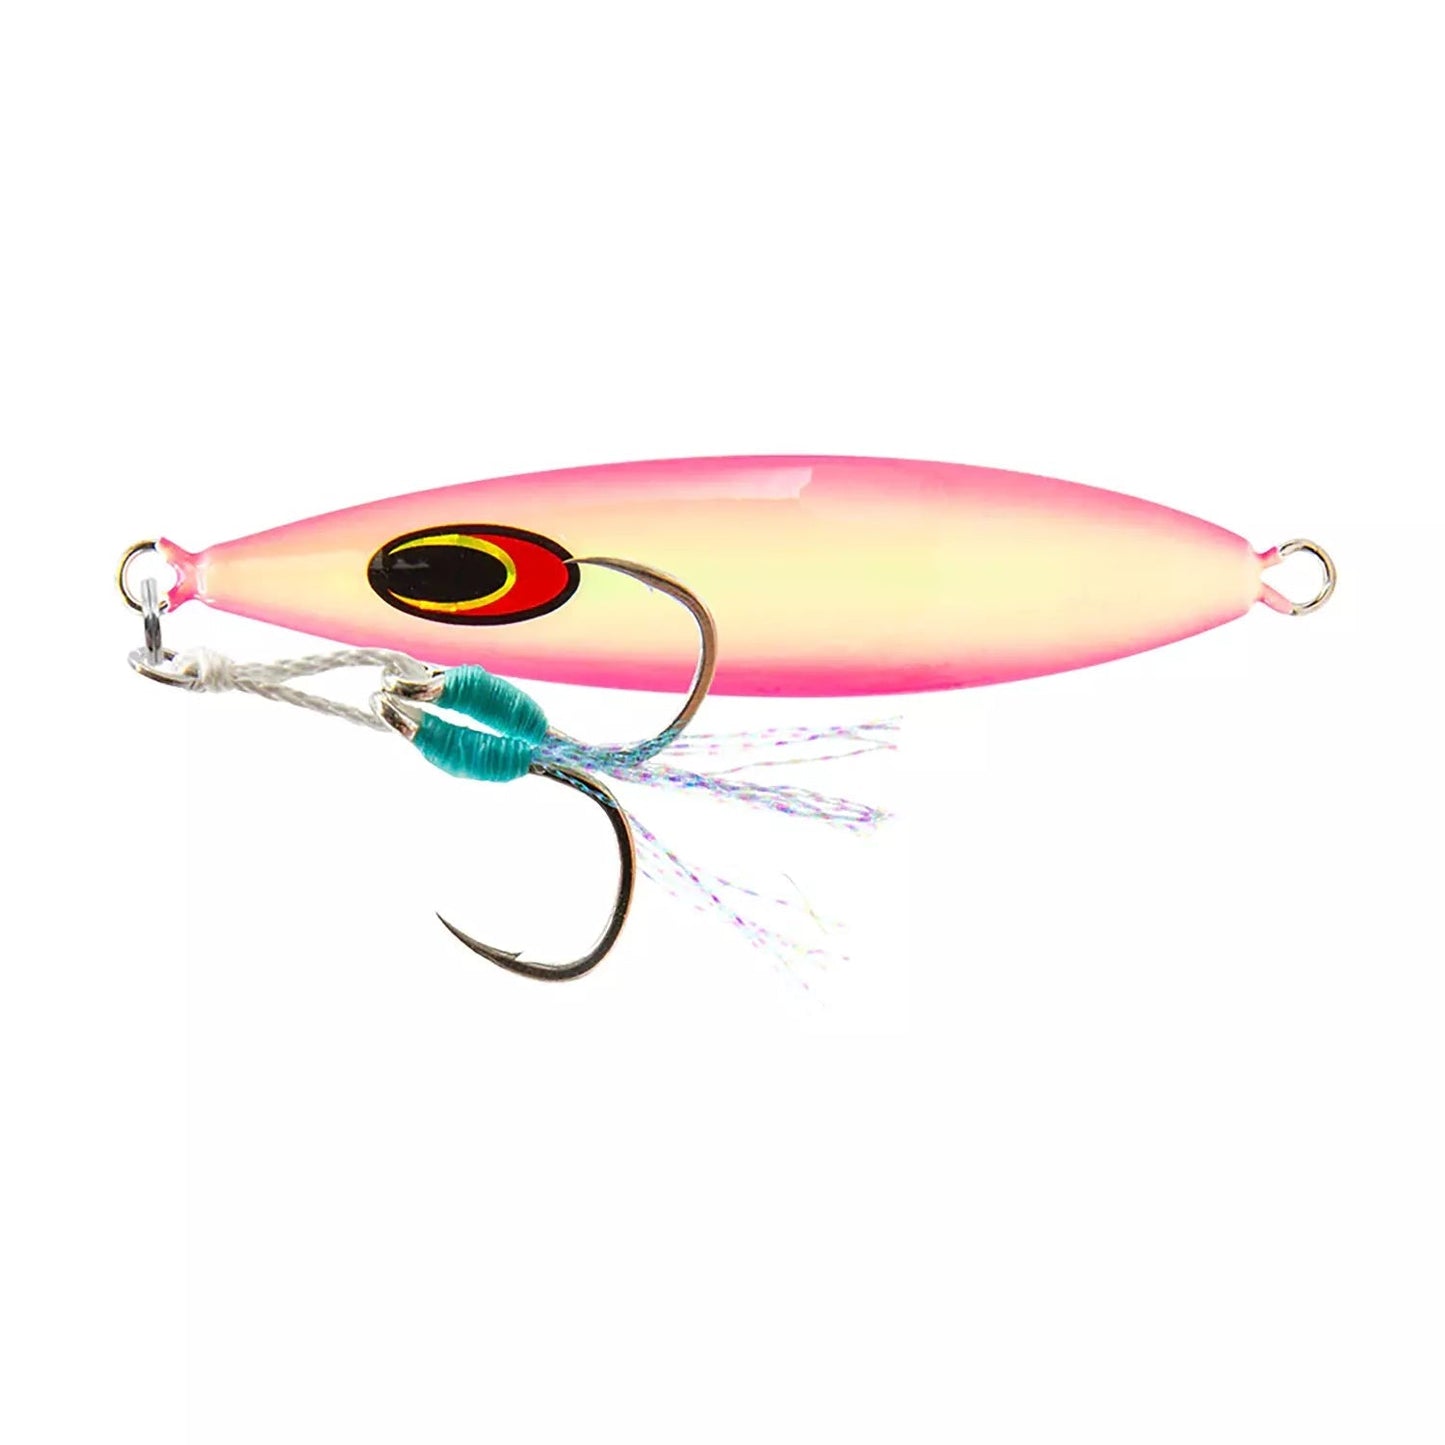 Nomad Gypsea Jig-Lure - Jig-Nomad-30g-Full Glow Pink-Fishing Station